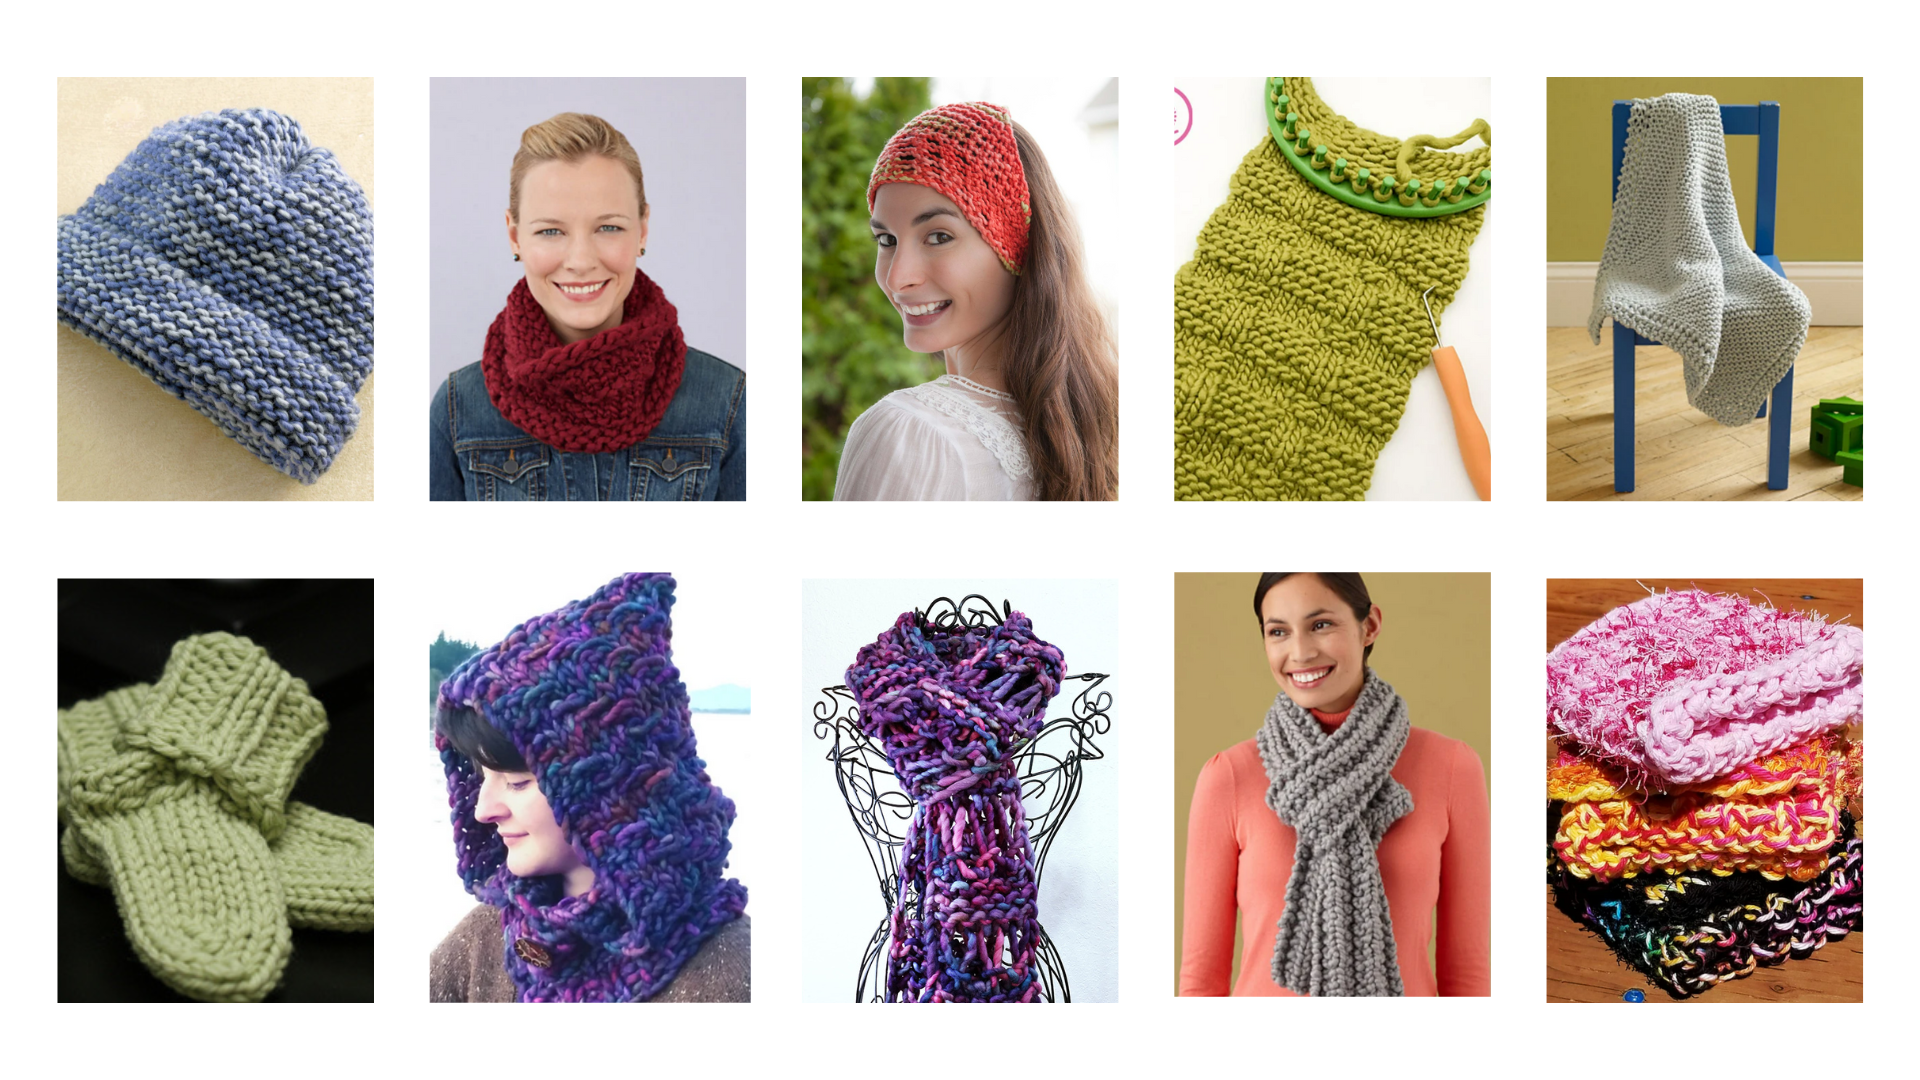 27 Free Loom Knitting Patterns for All Skill Levels - Sarah Maker